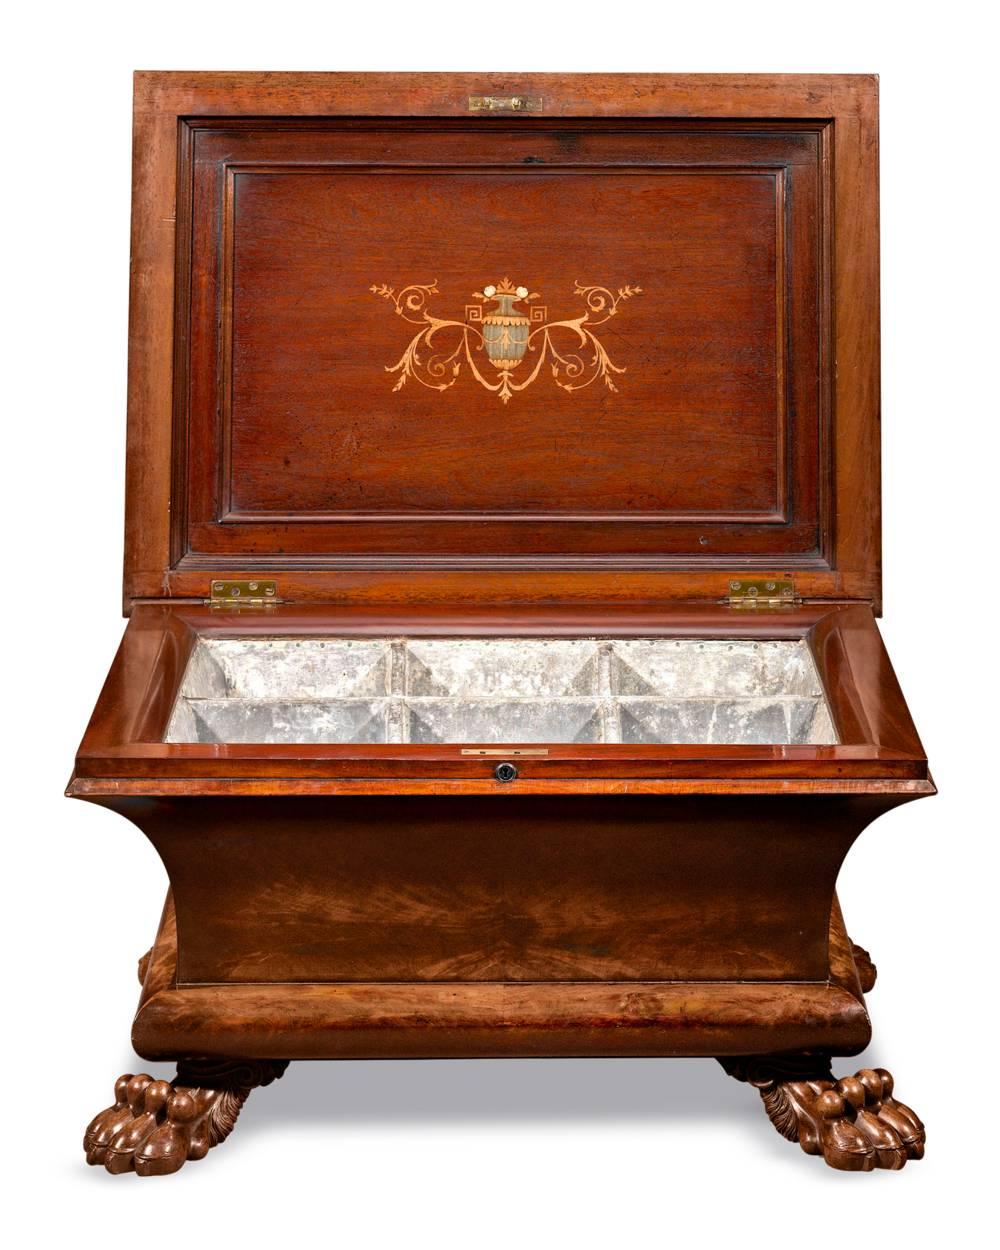 This refined William IV period wine cellarette is crafted of rich mahogany and boasts beautifully carved details. The sarcophagus form is distinguished by handsome lion paw feet and intricate inlay accents under the lid. Complete with its grape